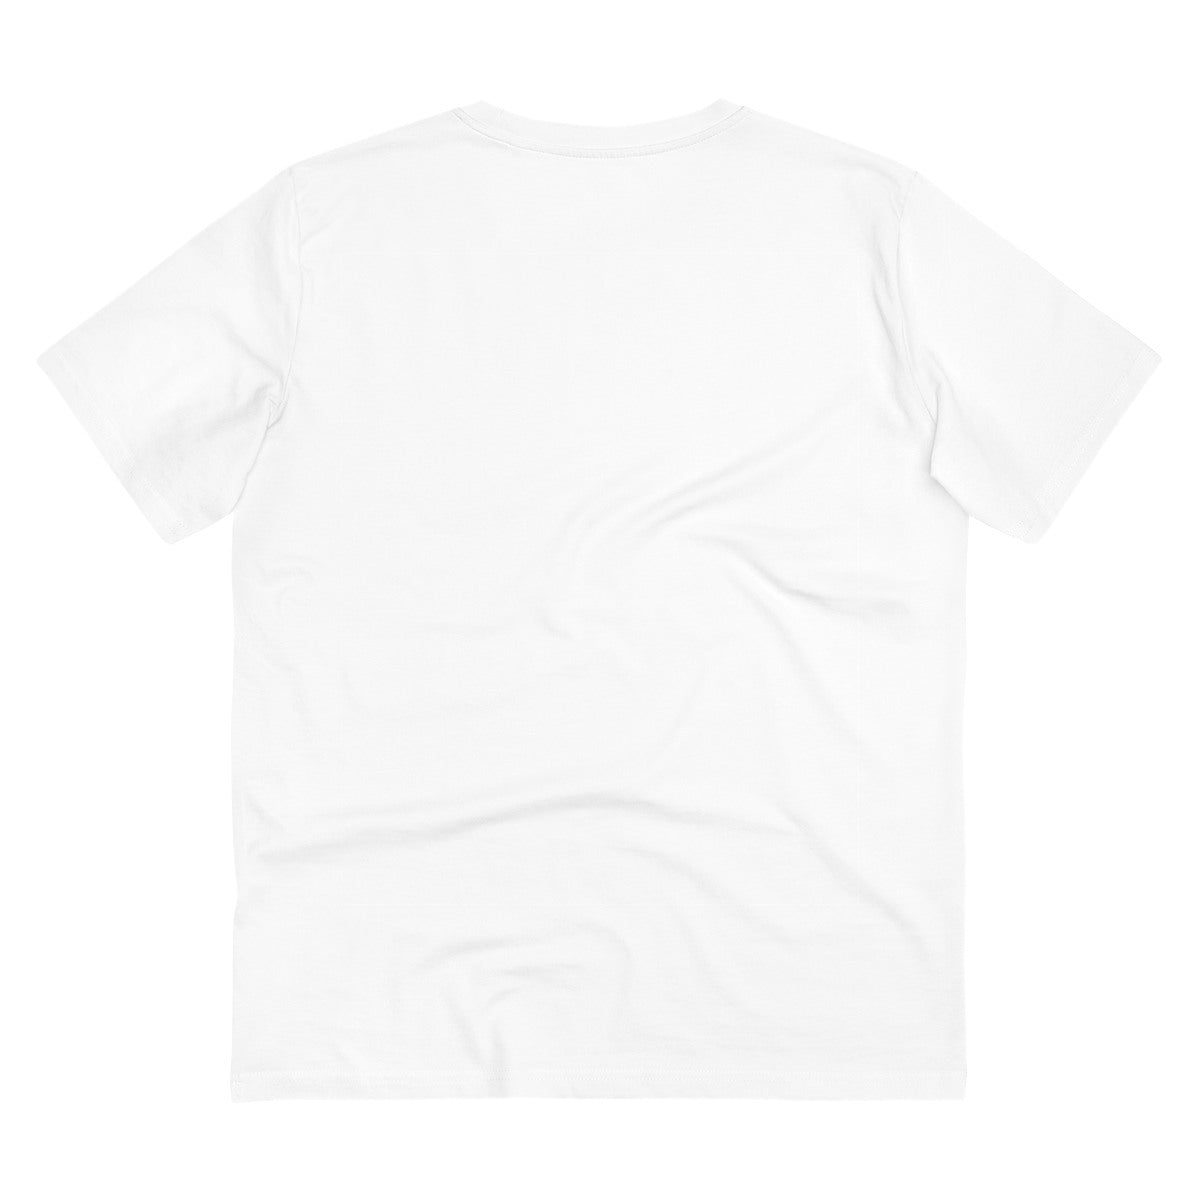 Men's PC Cotton 23rd Anniversary Printed T Shirt (Color: White, Thread Count: 180GSM) - GillKart